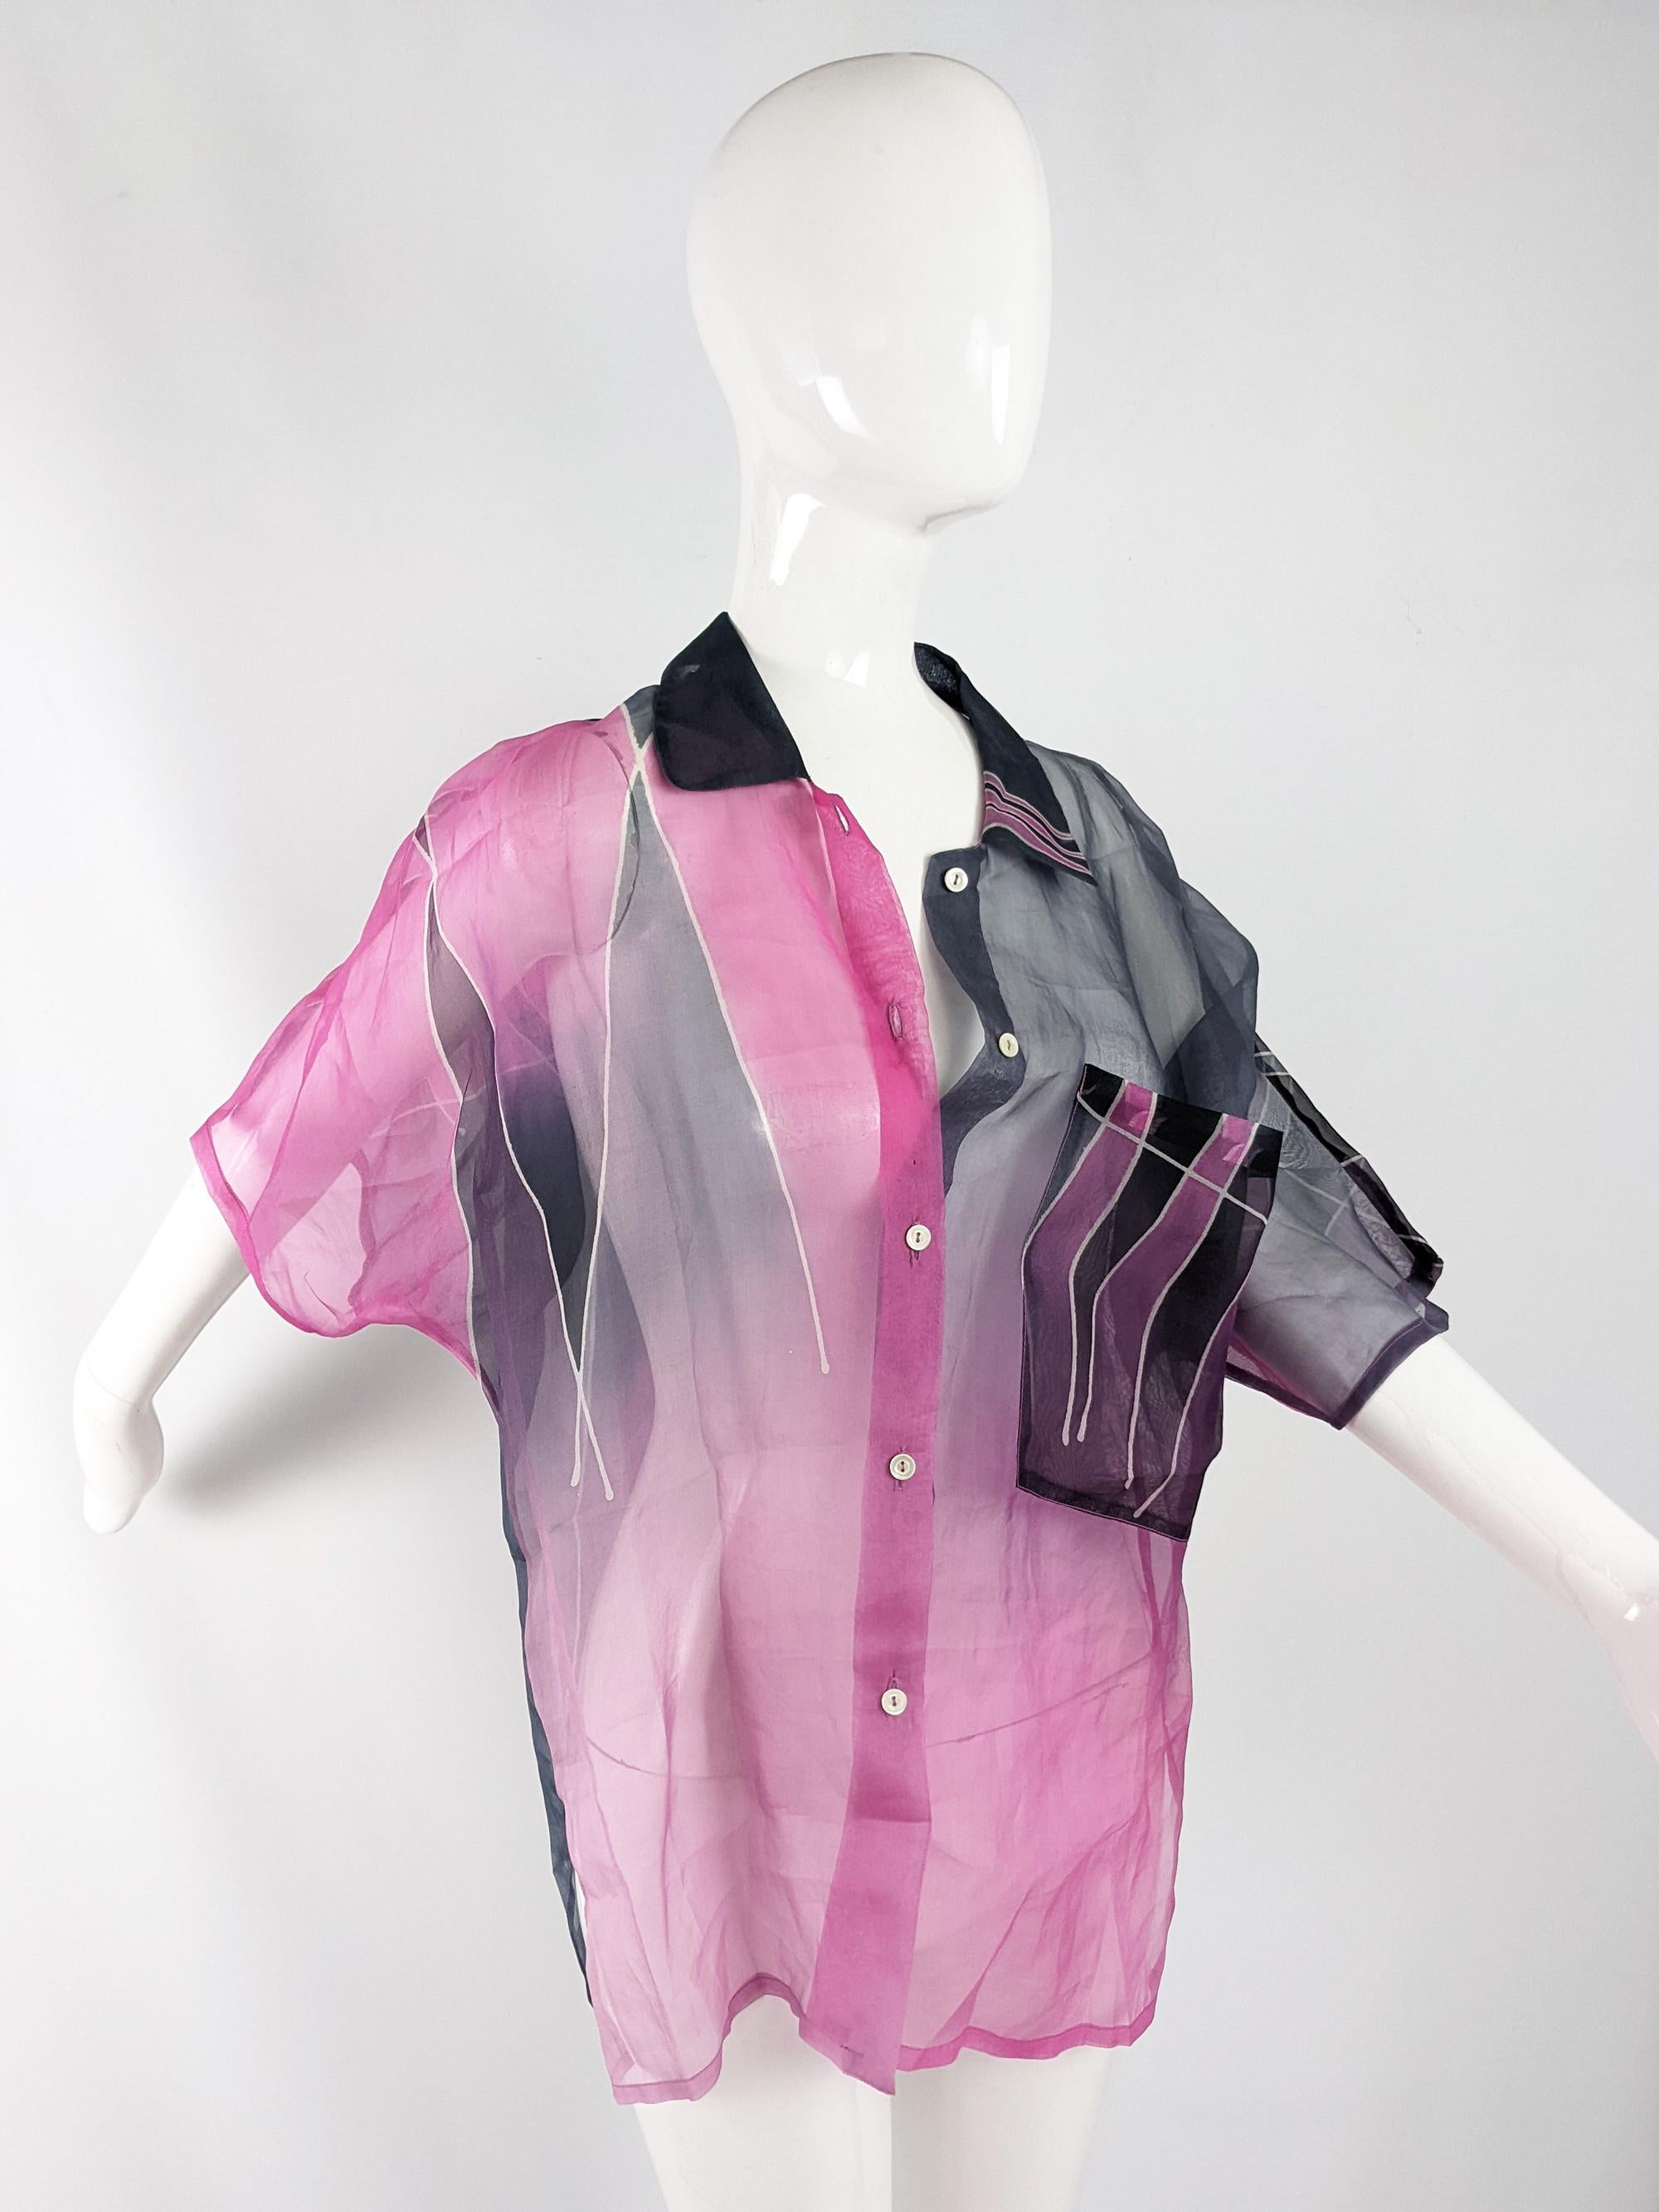 Judy Meyers Hand Painted Silk Vintage Abstract Print Organza Blouse, 1980s In Good Condition For Sale In Doncaster, South Yorkshire